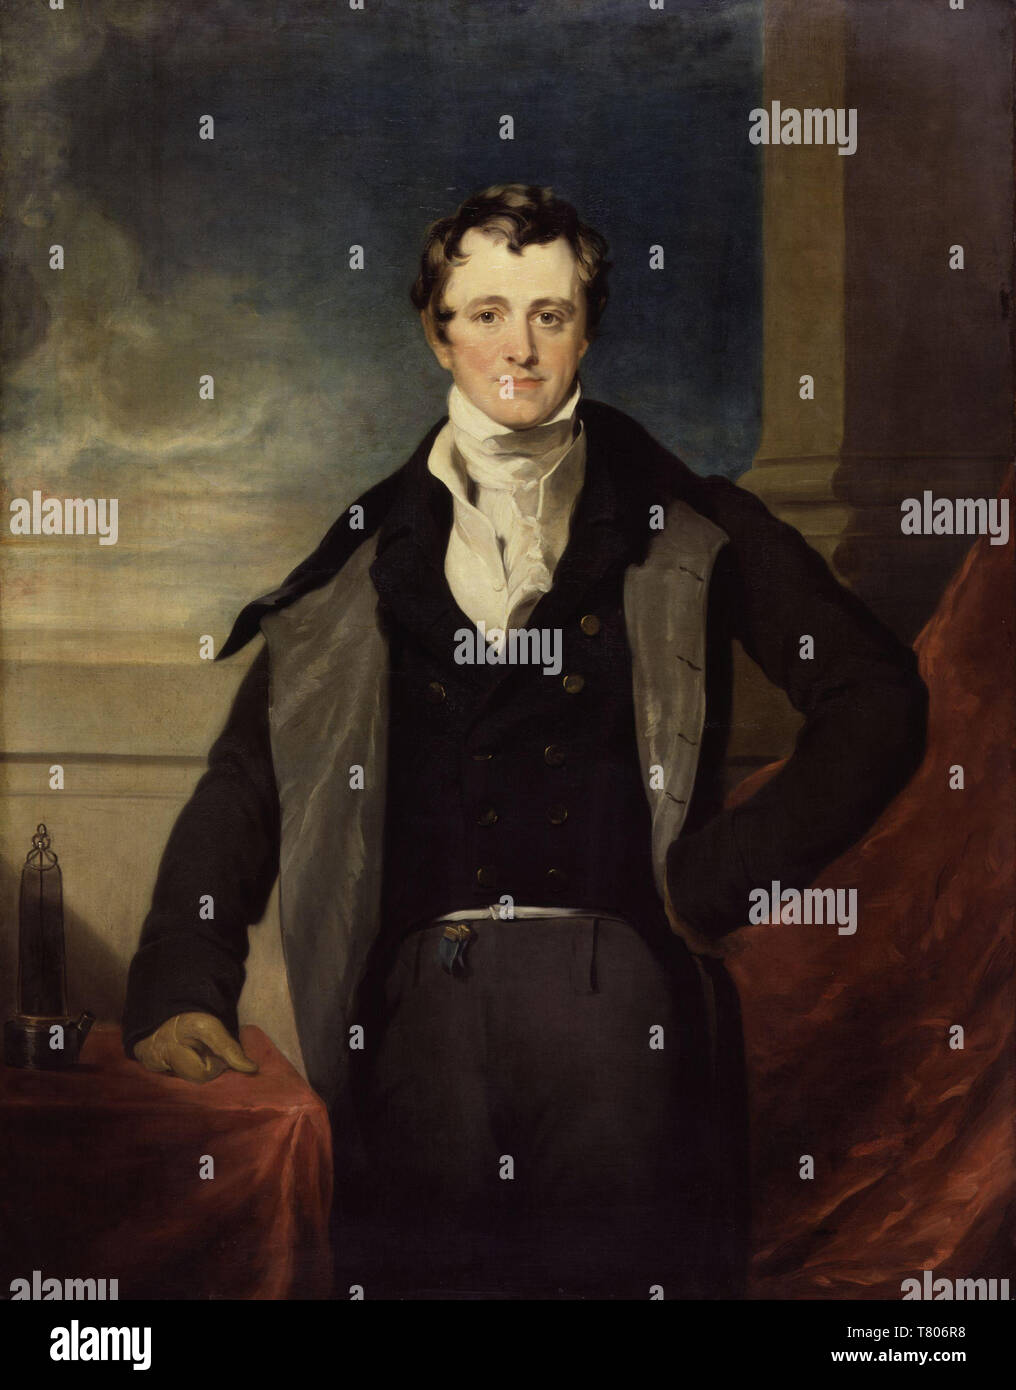 Humphry Davy, English Chemist and Inventor Stock Photo